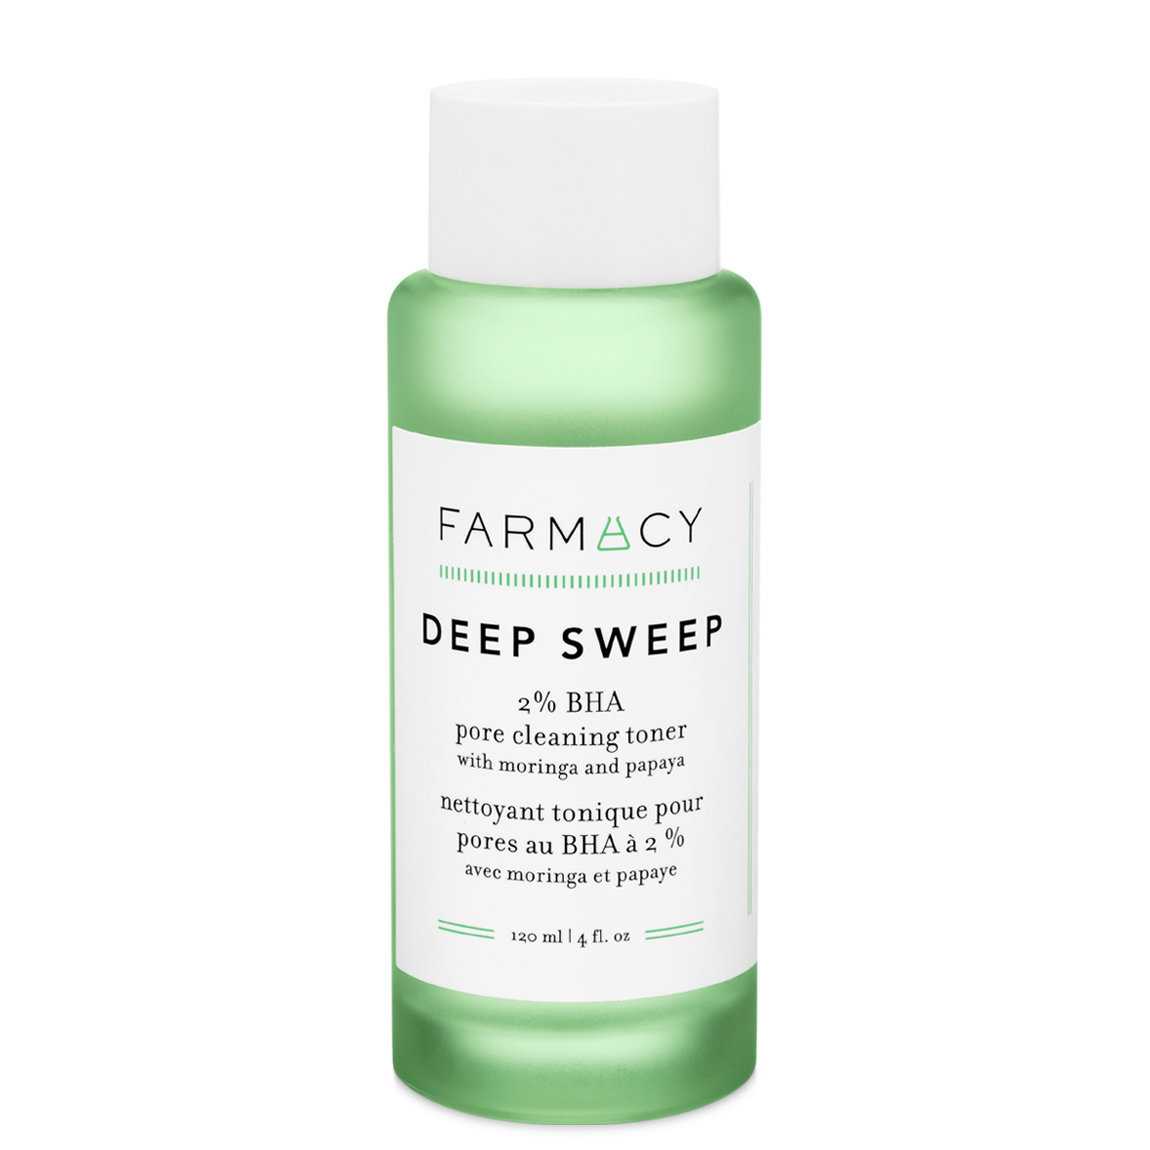 Farmacy Deep Sweep 2% BHA Pore Cleaning Toner alternative view 1 - product swatch.